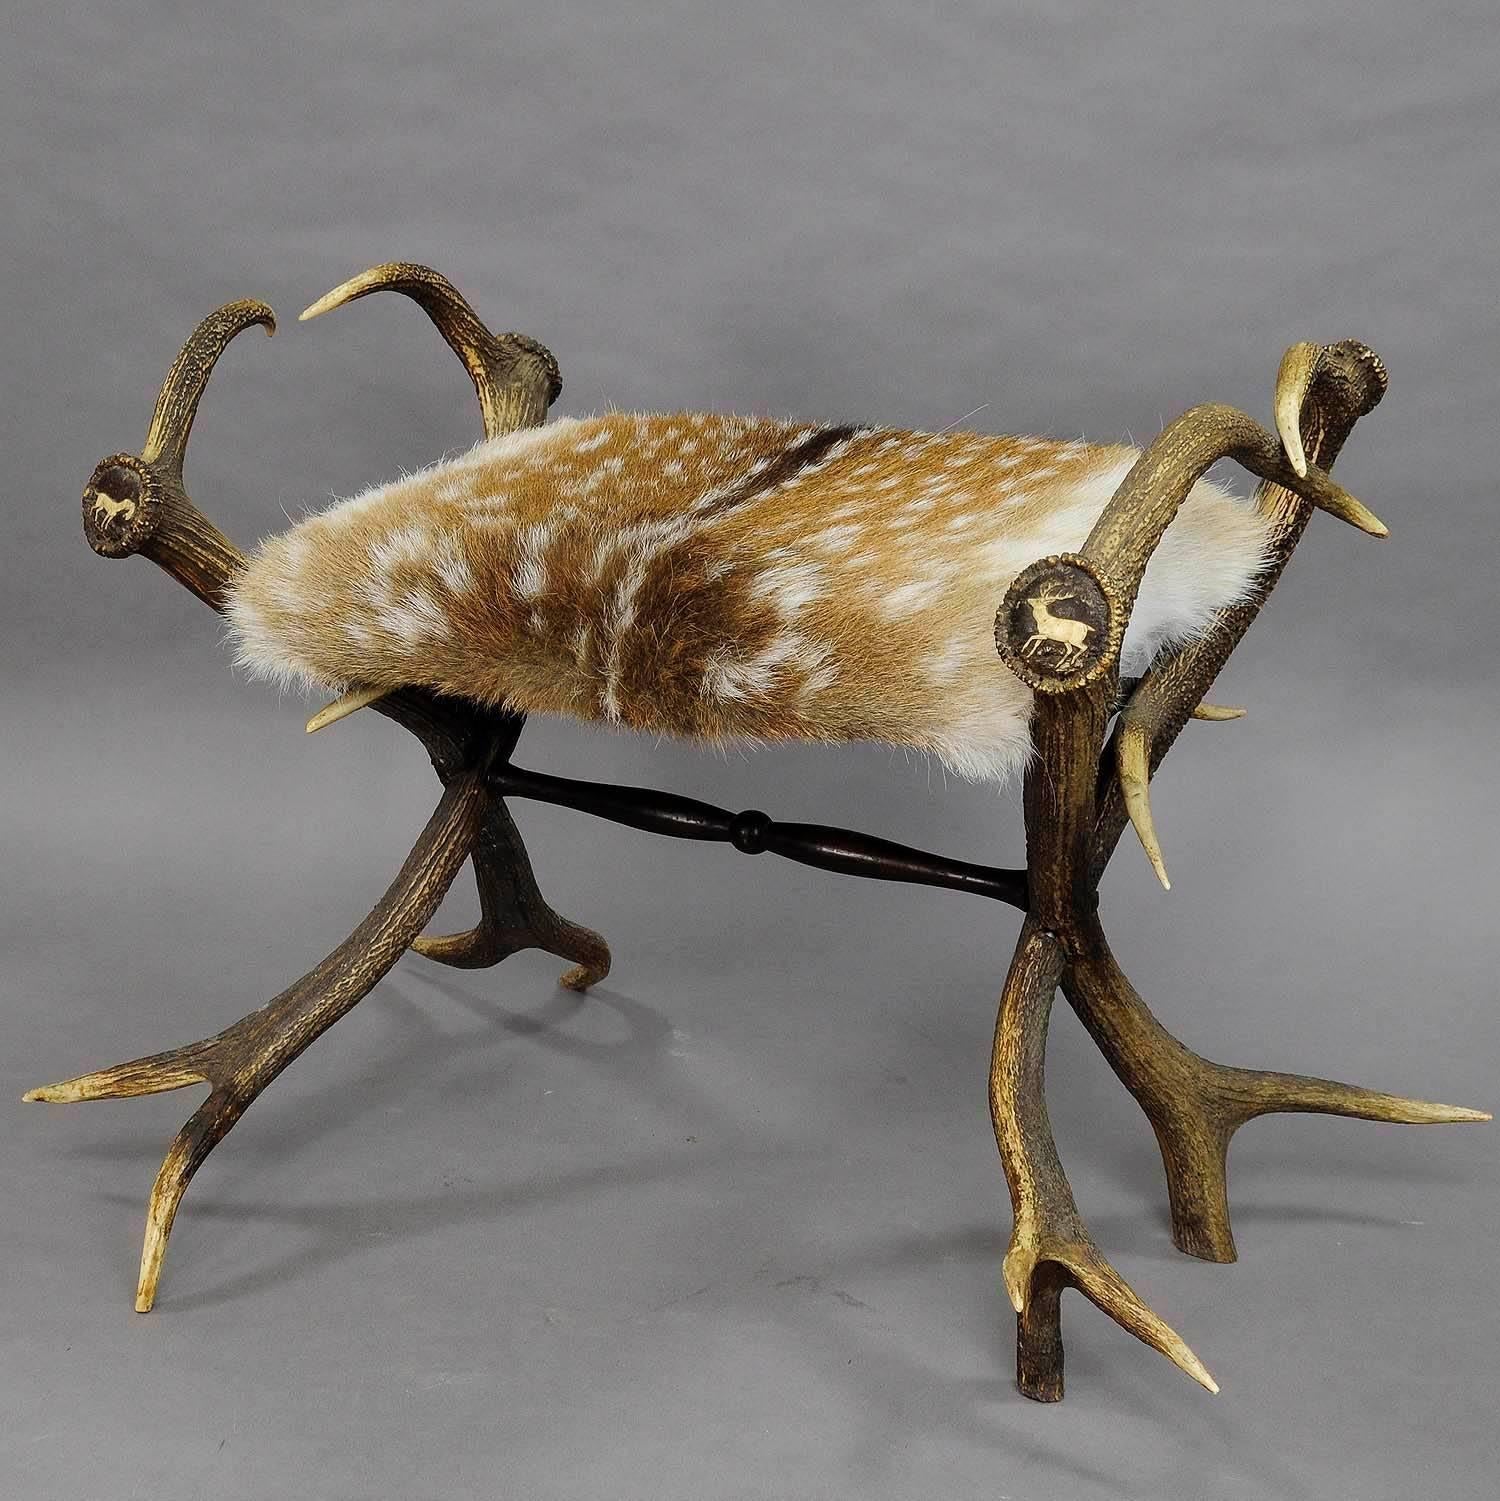 A great antique antler stool with original deer horns as legs. Each ending of the horns with elaborate animal carvings such as deer, fallow deer, stag and stag hound, very good sturdy condition, seat covered with new fallow deer fur. Executed in